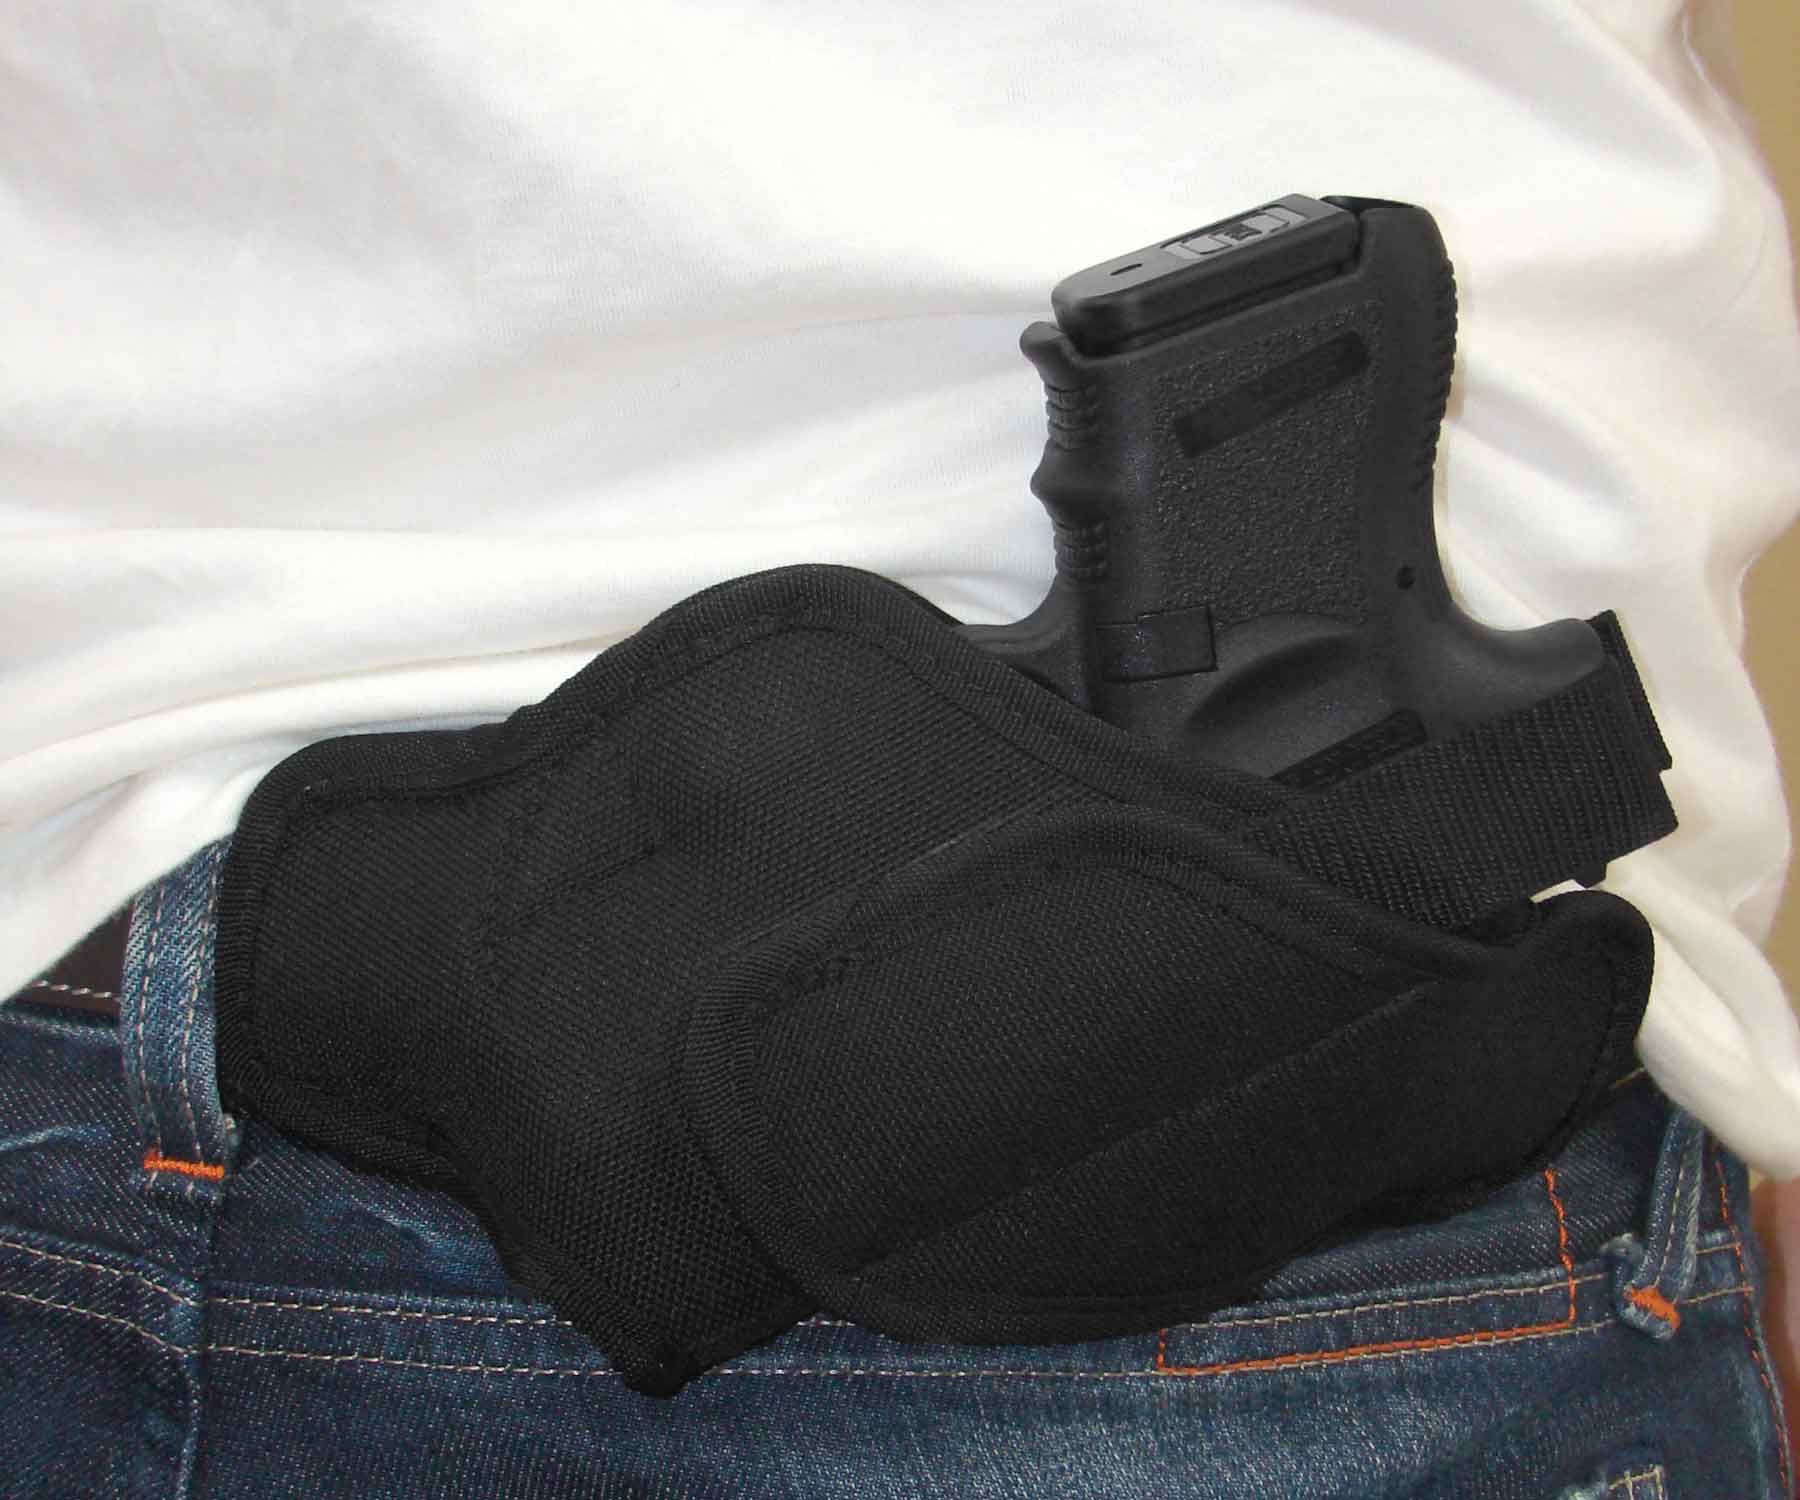 Details about  / Deep Concealment Shoulder Holster Gun Holster All Subcompact And Compact Pistols